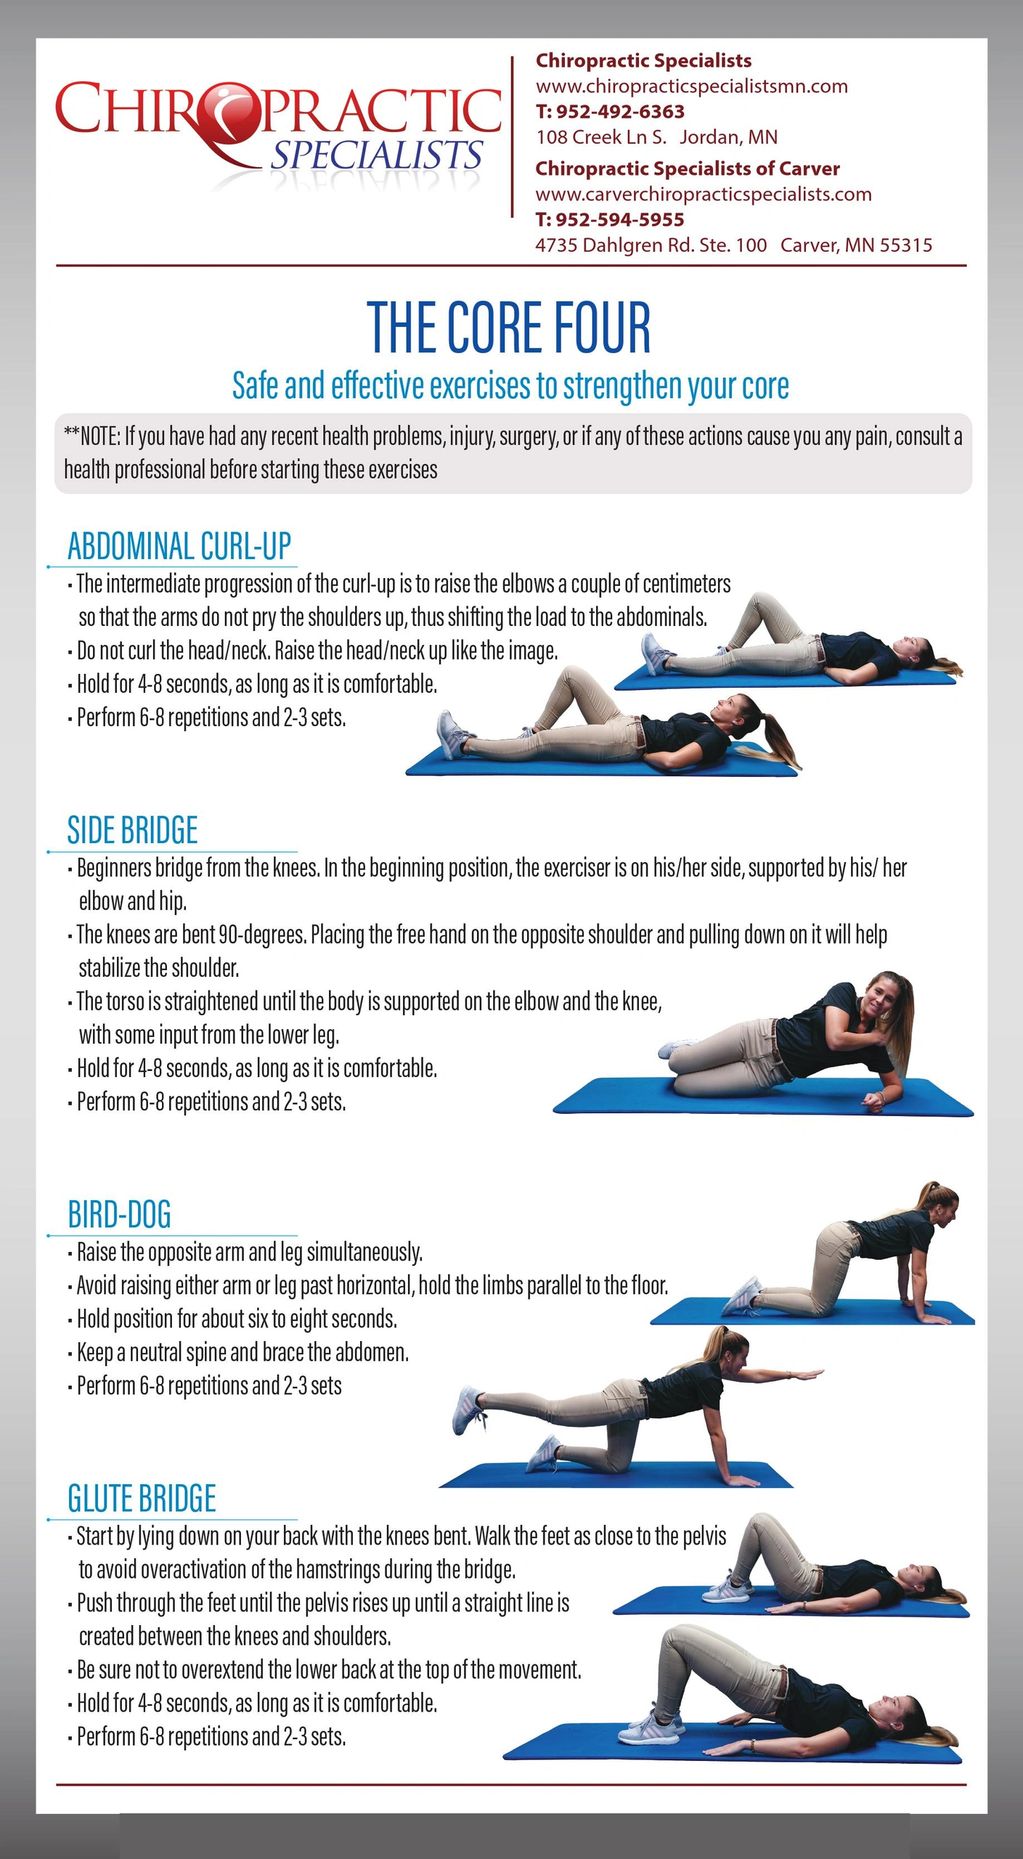 Printable core exercises that are safe and effective to strengthen your core.